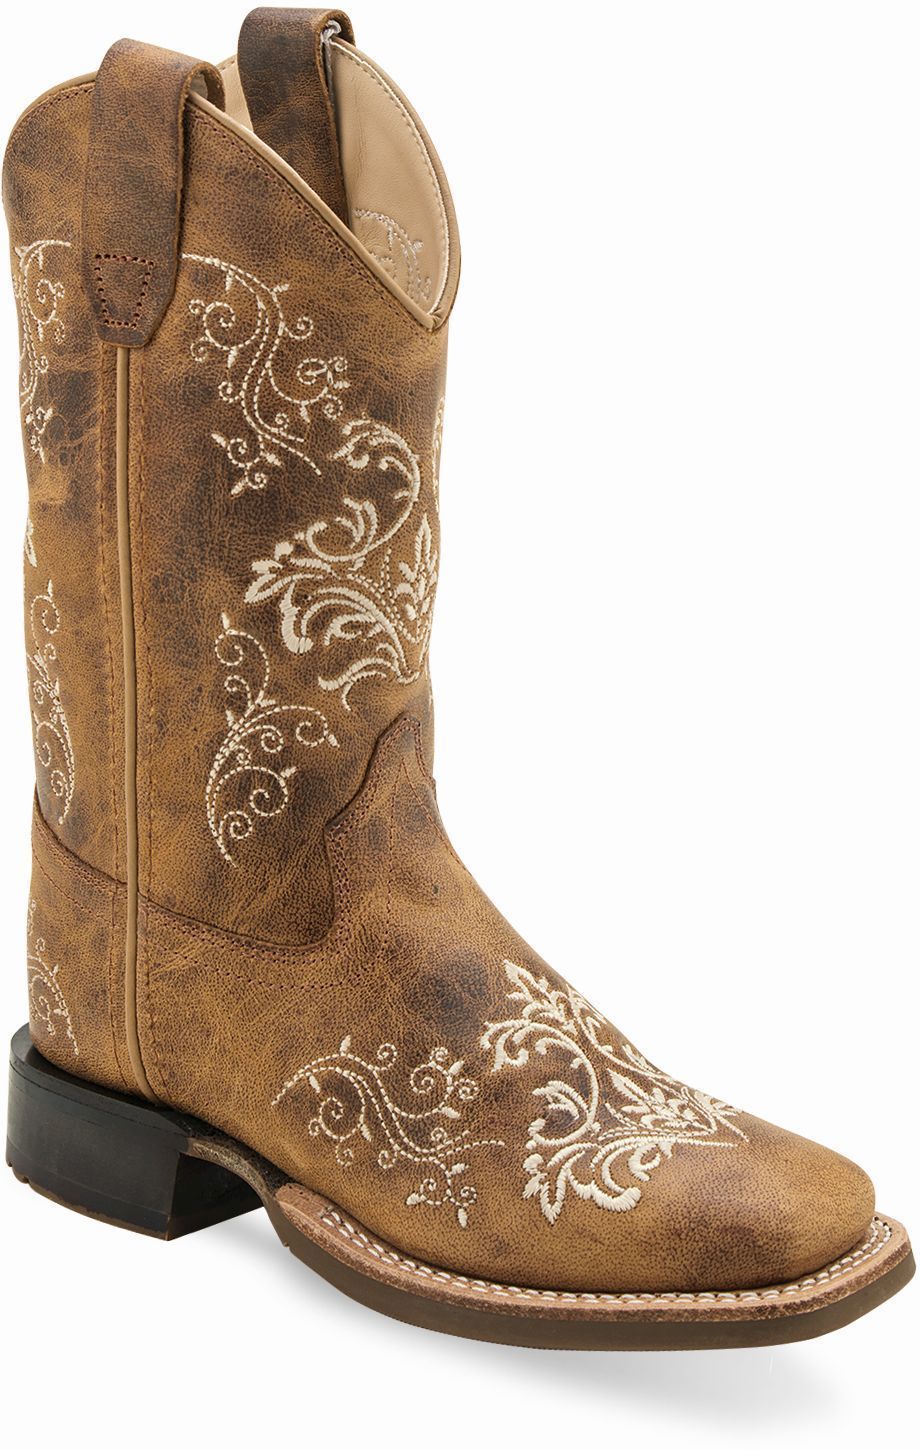 Old West Burnt Tan Youth's Broad Square Toe Boots